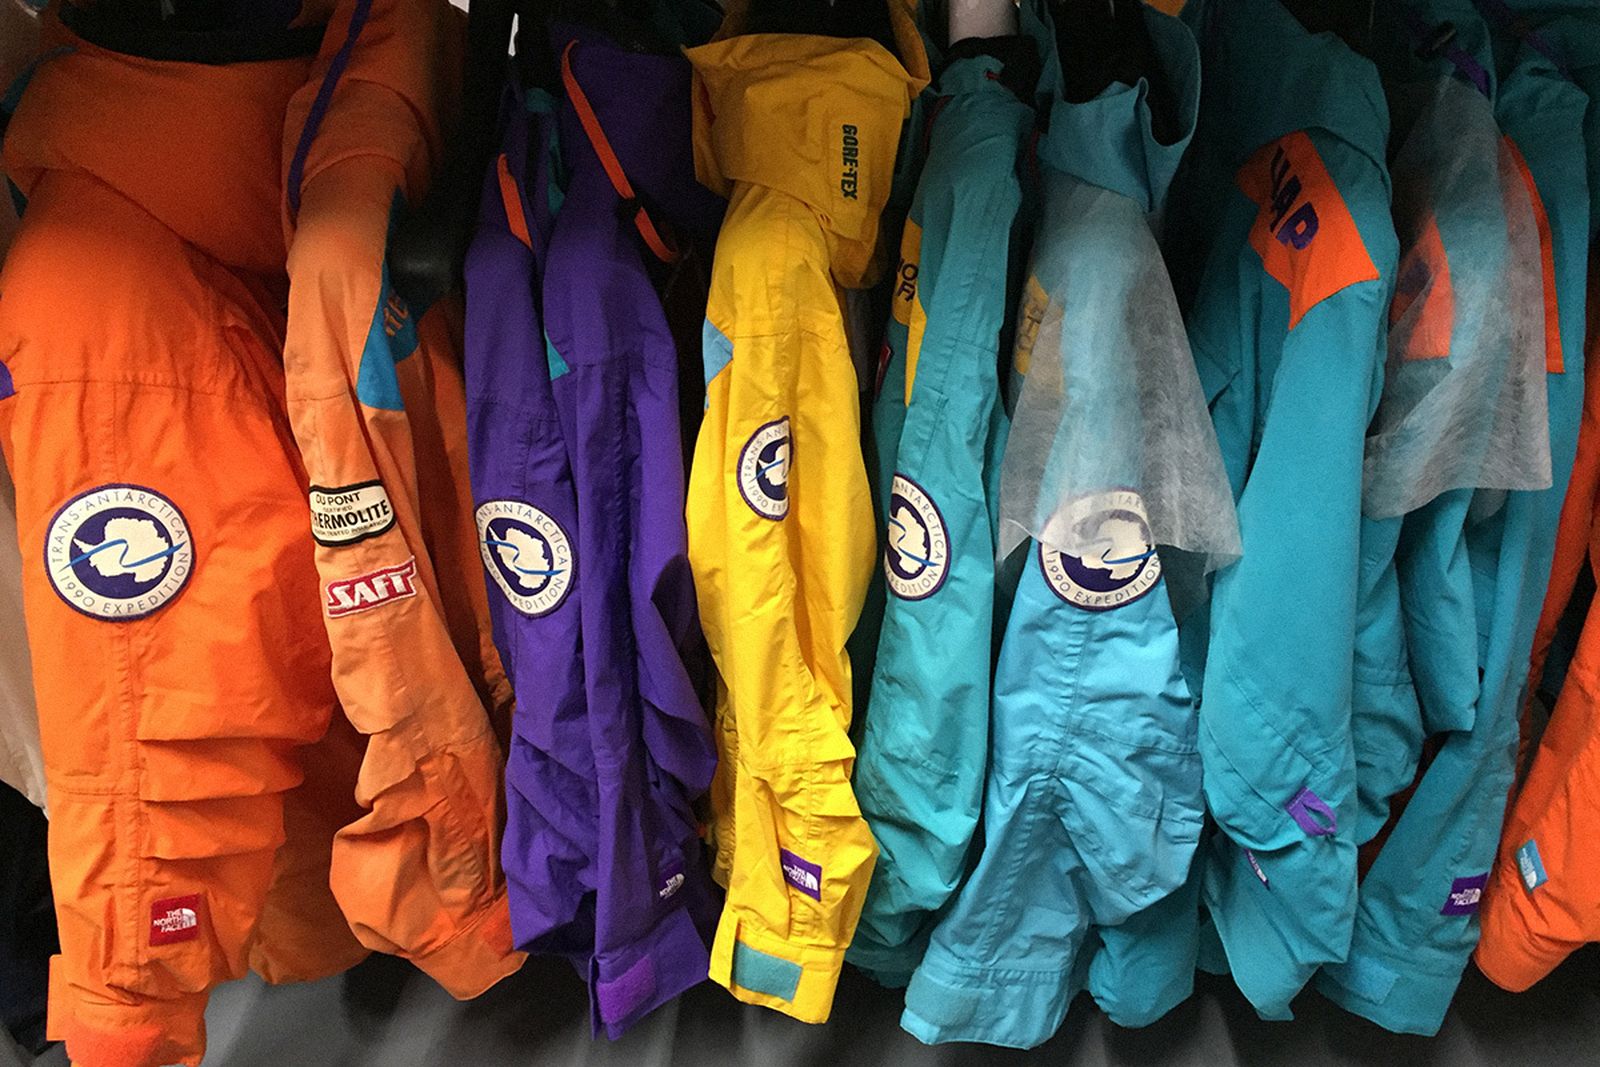 Expedition jackets, shot by Haas at the W. L. Gore US archive